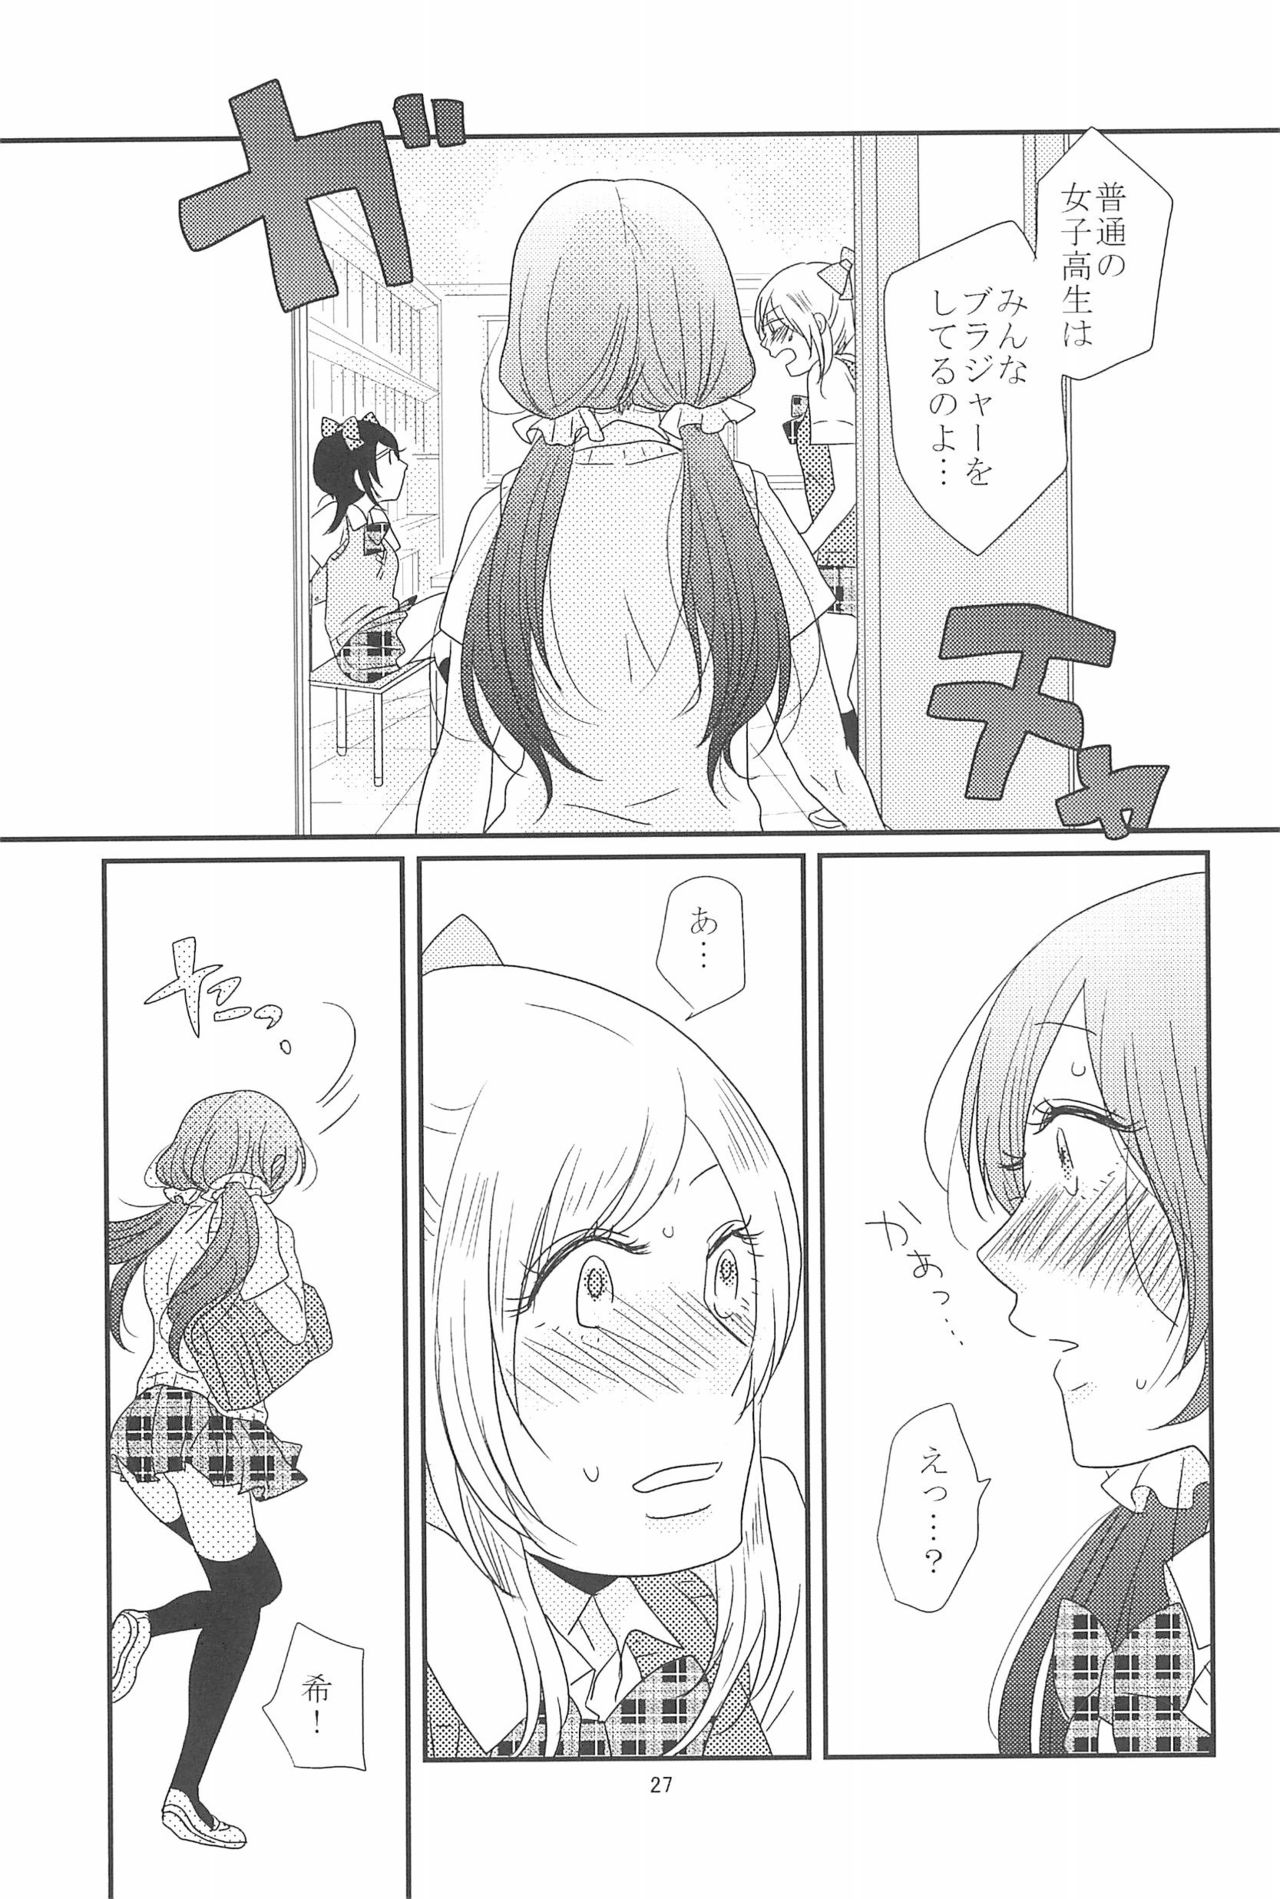 (C90) [BK*N2 (Mikawa Miso)] HAPPY GO LUCKY DAYS (Love Live!) page 31 full